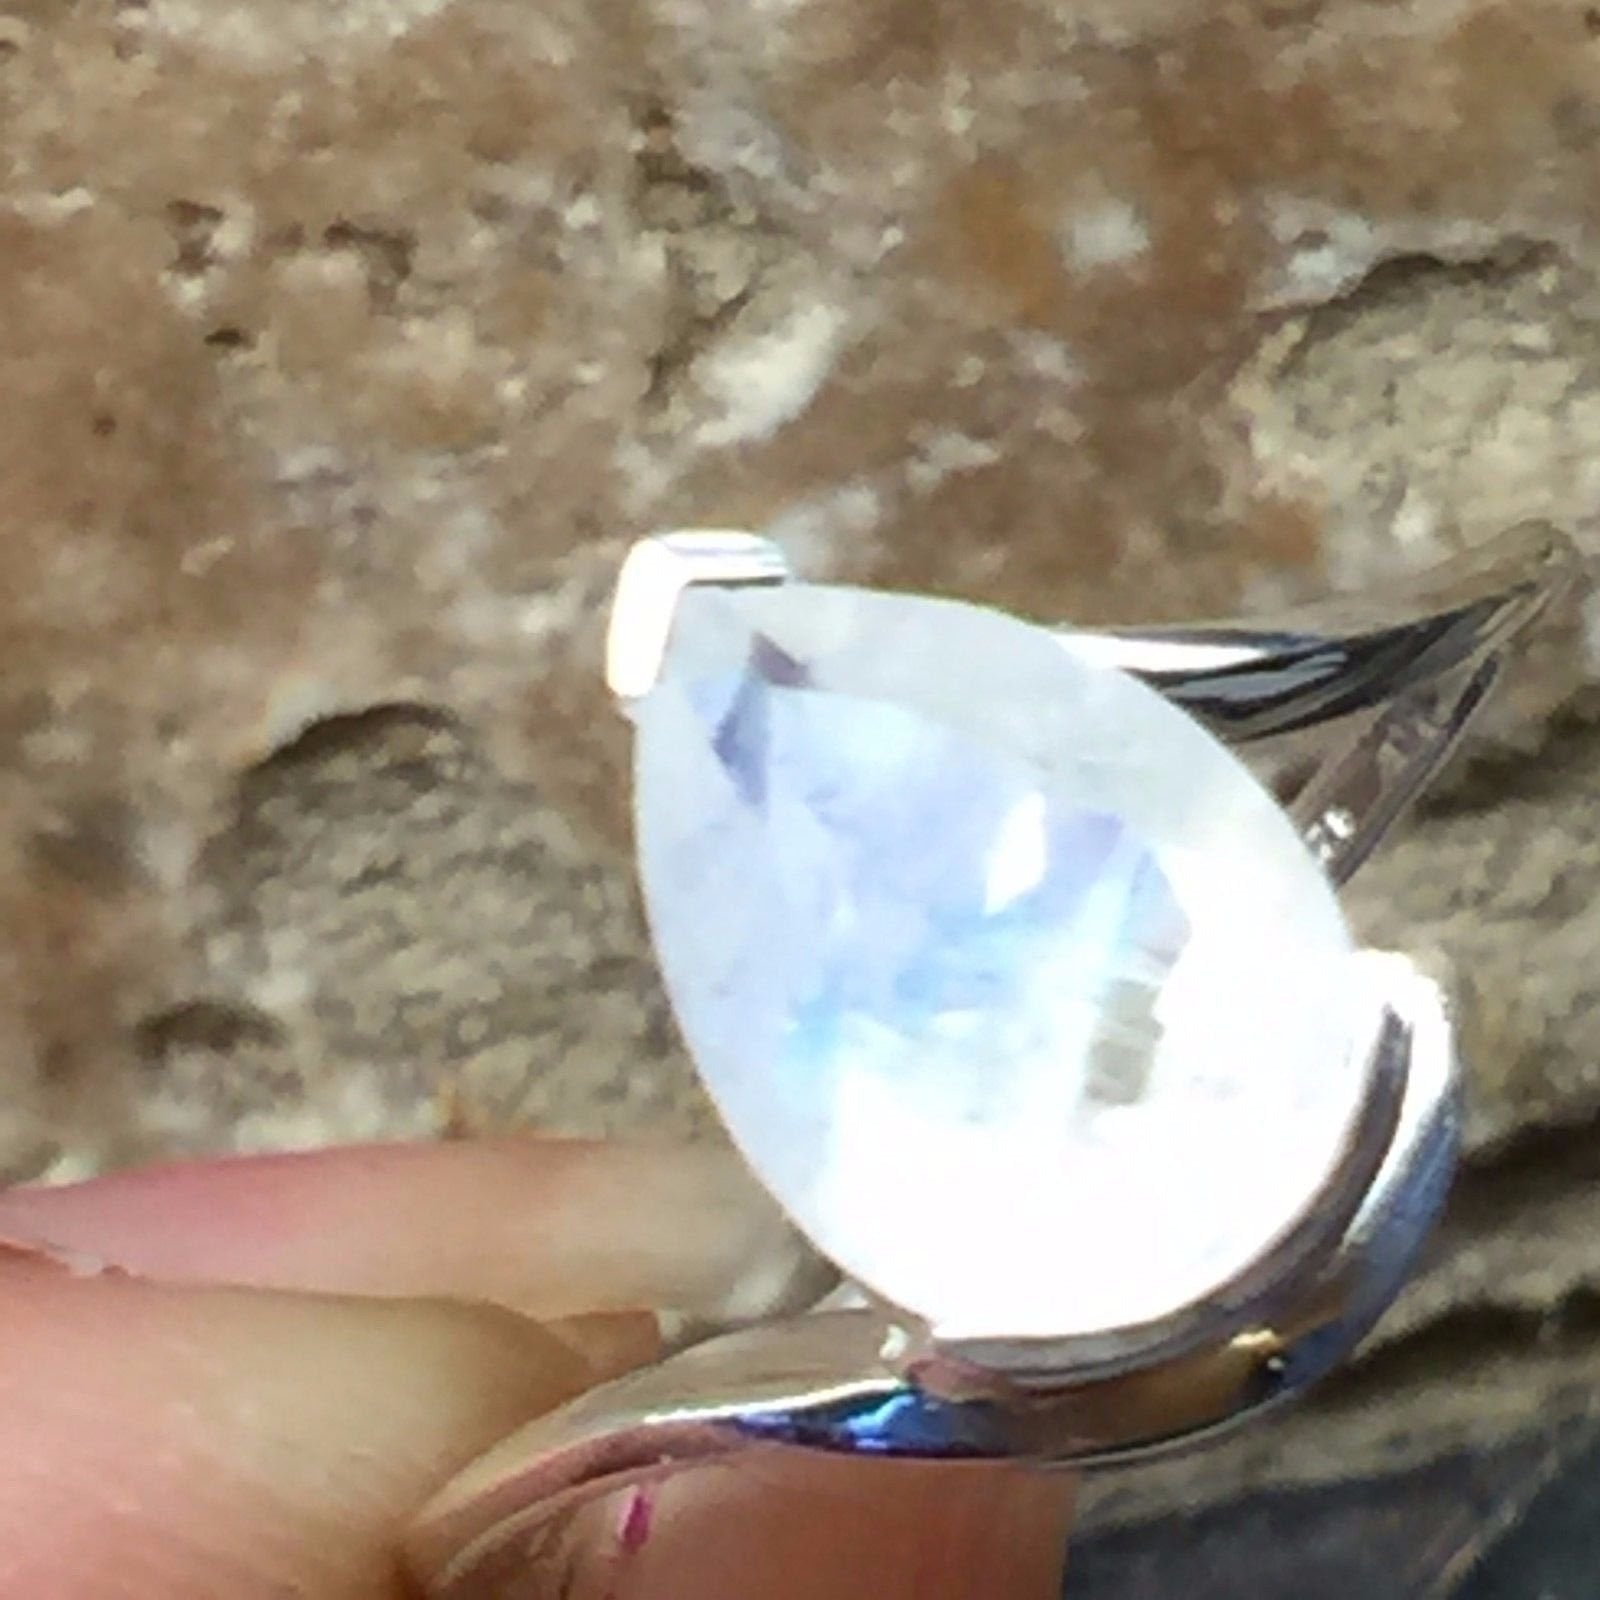 Genuine Rainbow Moonstone 925 Solid Sterling Silver Ring Size 5, 6, 7, 8, 9 - Natural Rocks by Kala